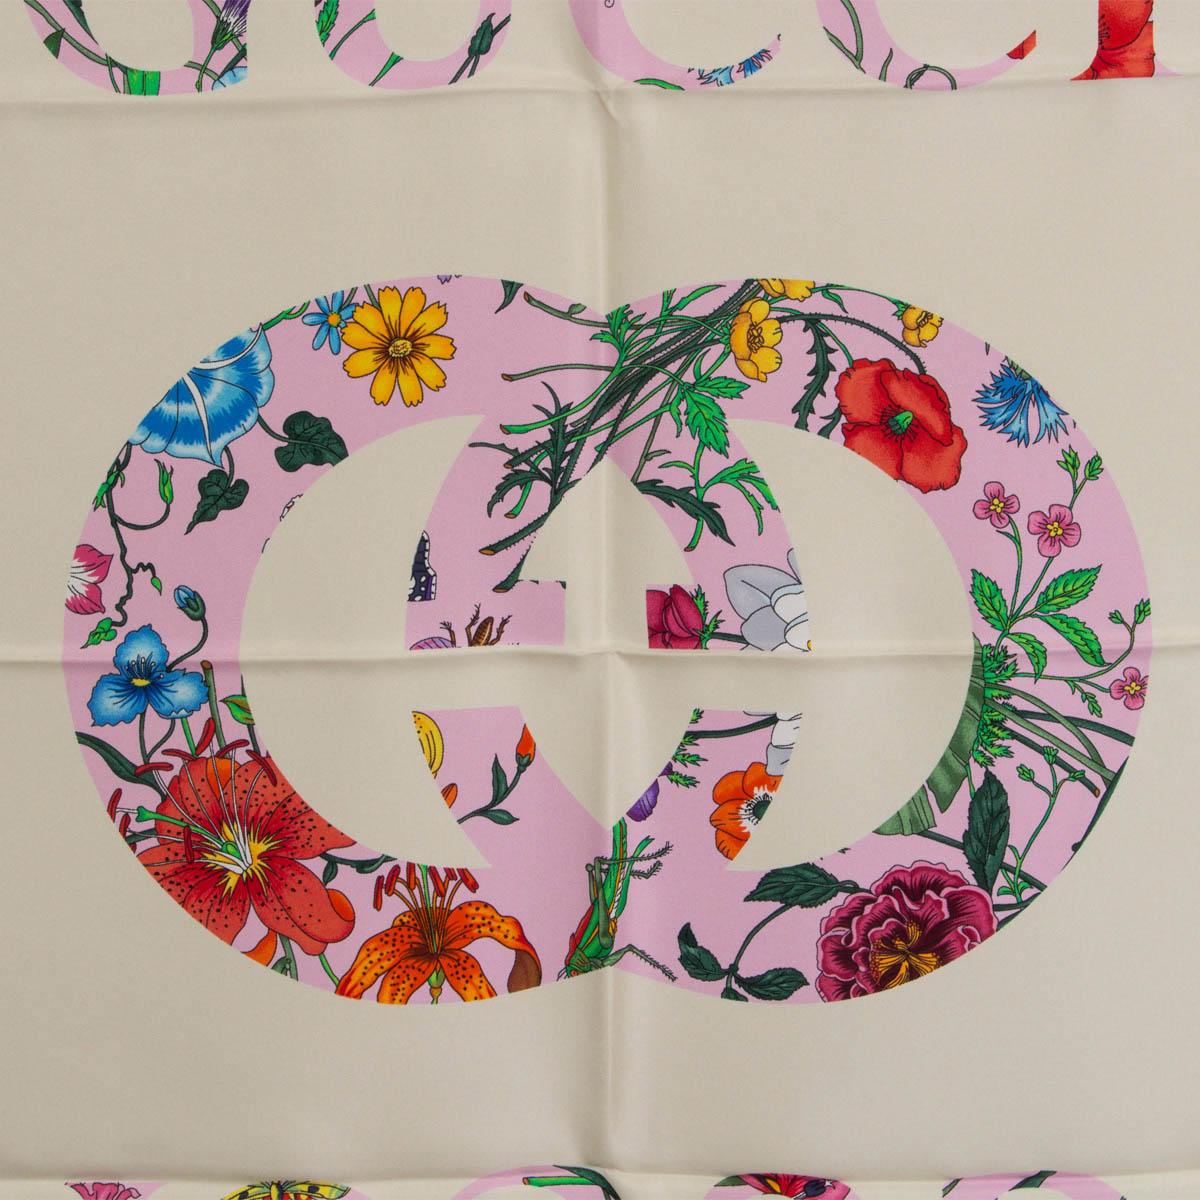 100% authentic Gucci Flora GG Vinatge print shawl in light pink and ivory silk (100%) combines two of the House's most distinctive designs into an unexpected and contemporary pattern. The historic Flora motif, first presented by Vittorio Accornero